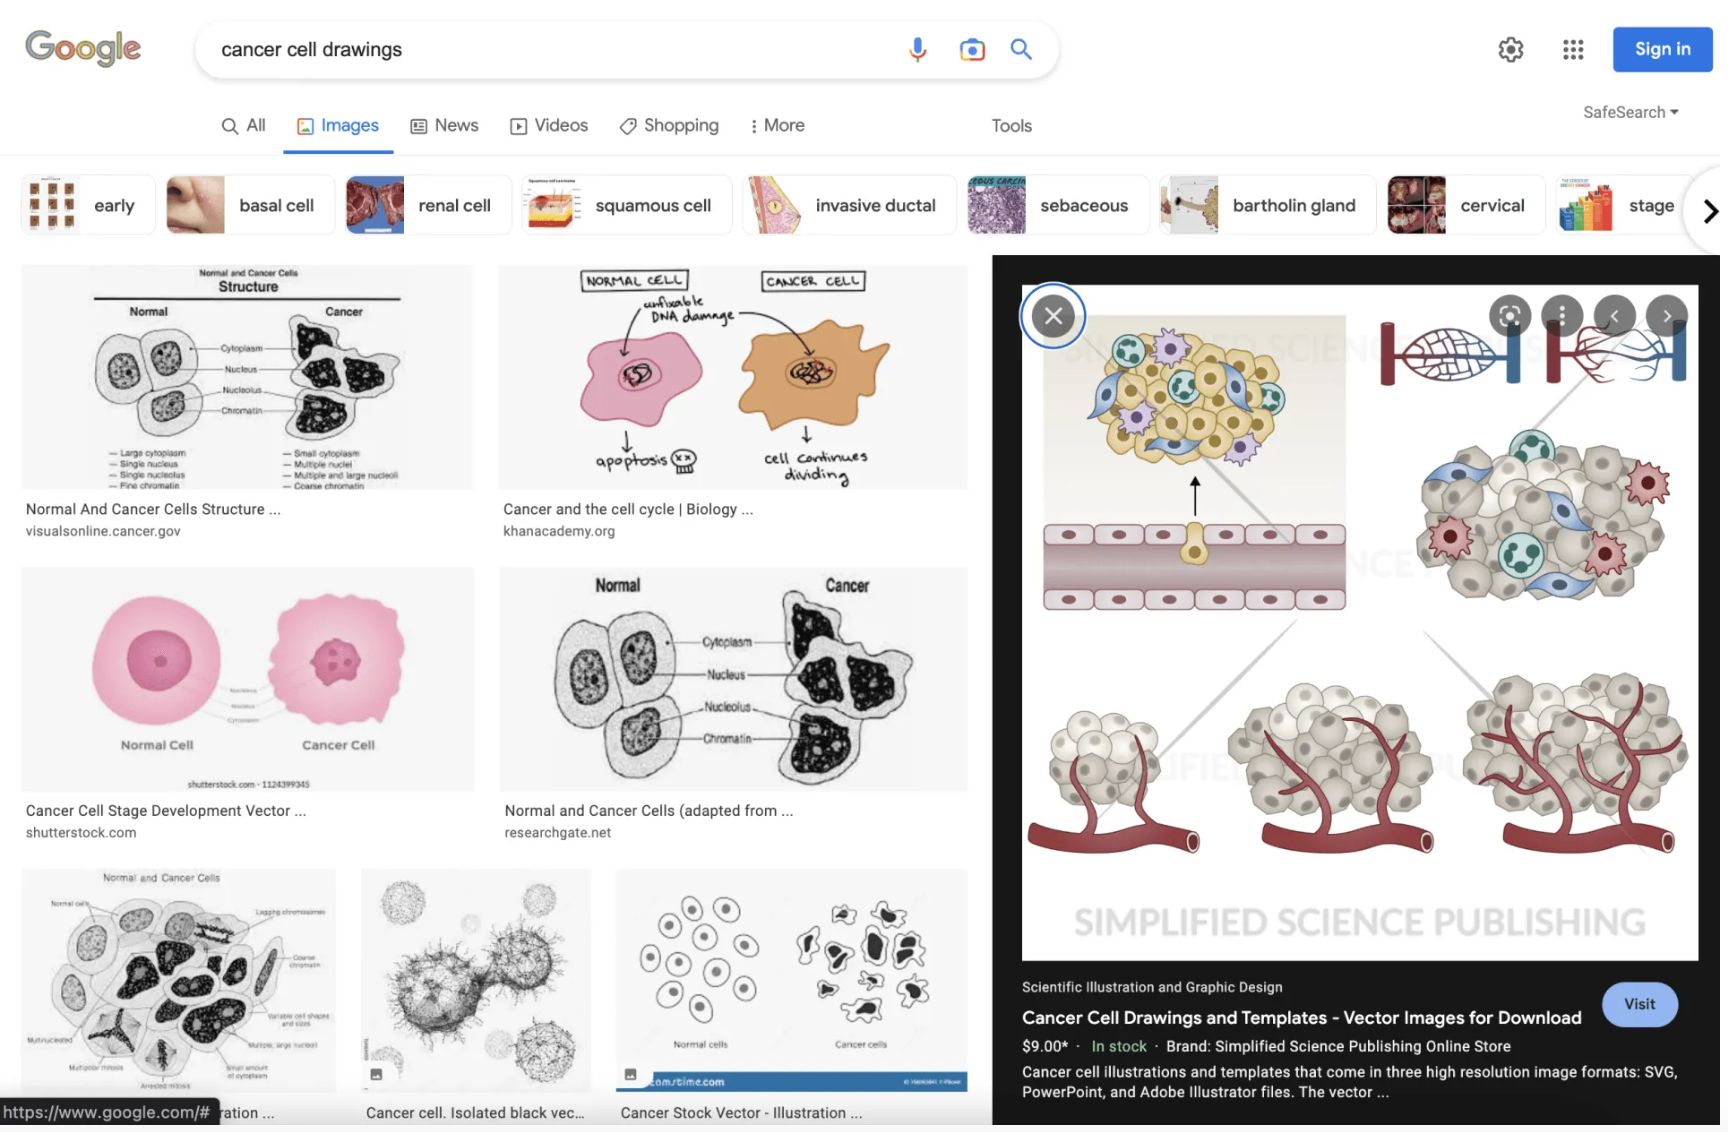 Screenshot Google example of cancer cell drawings